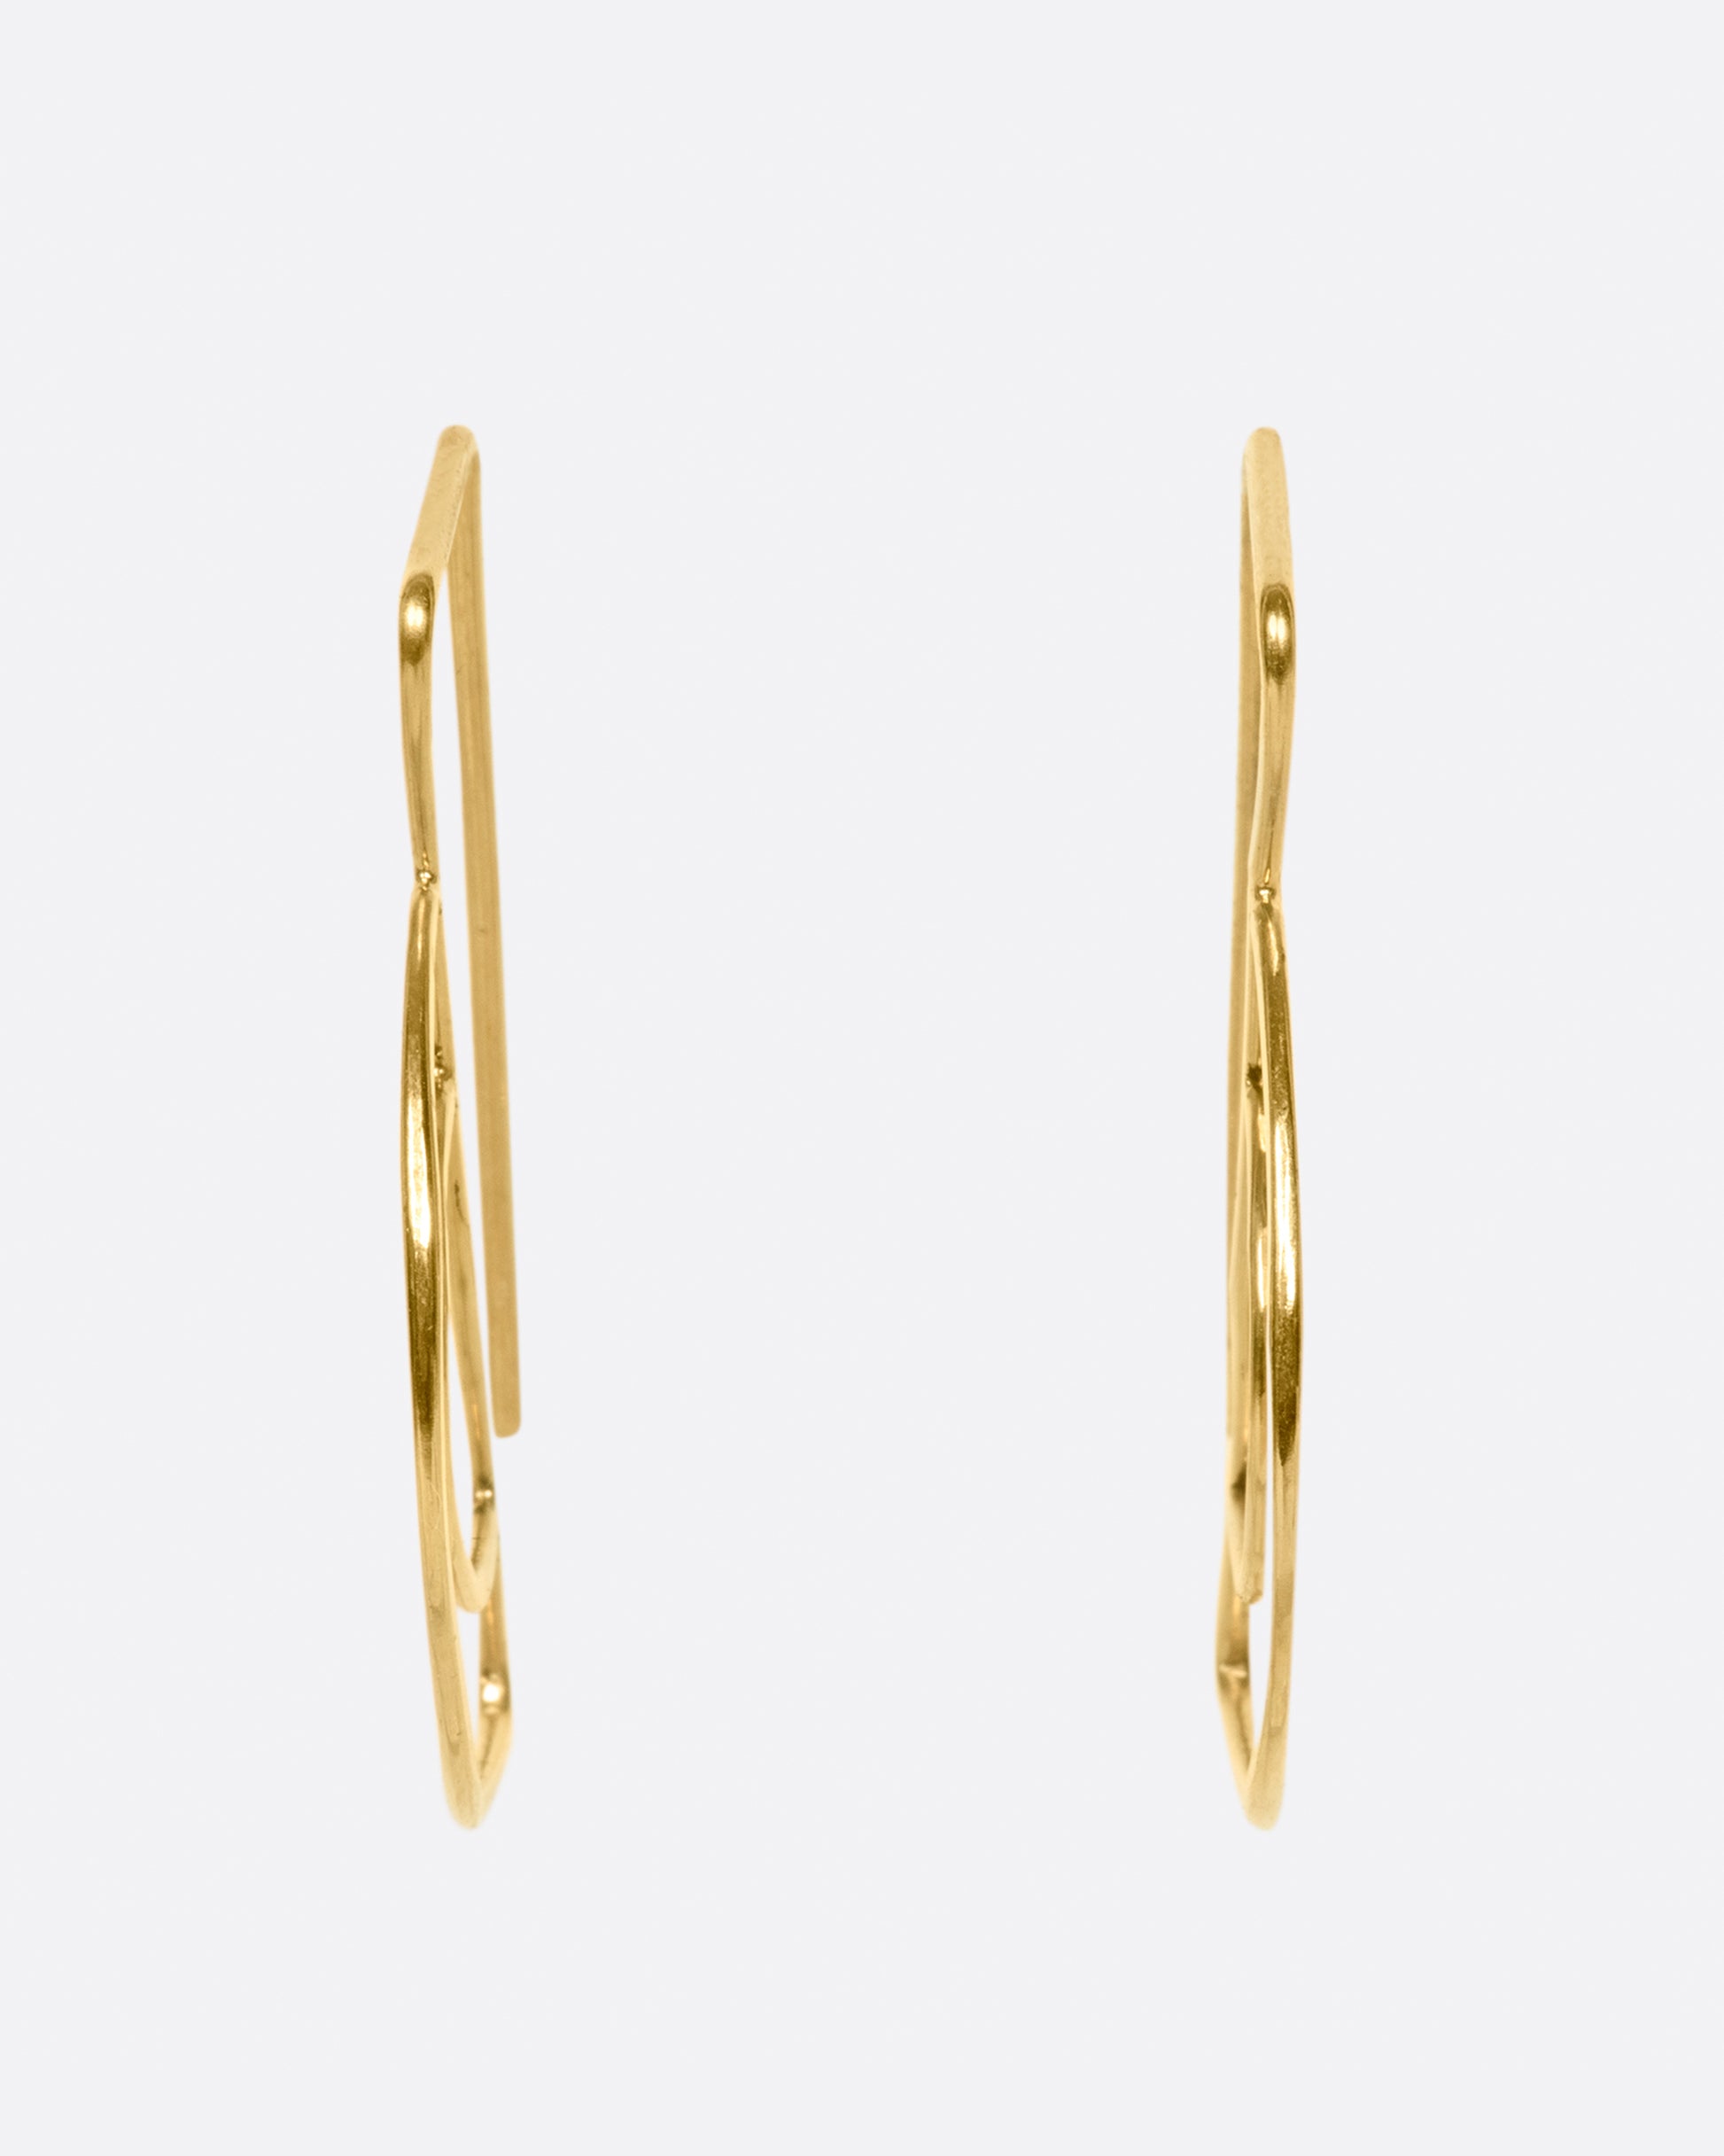 These double semi-circle earrings face forward and the long straight wires hang behind the earlobe; framing the face.